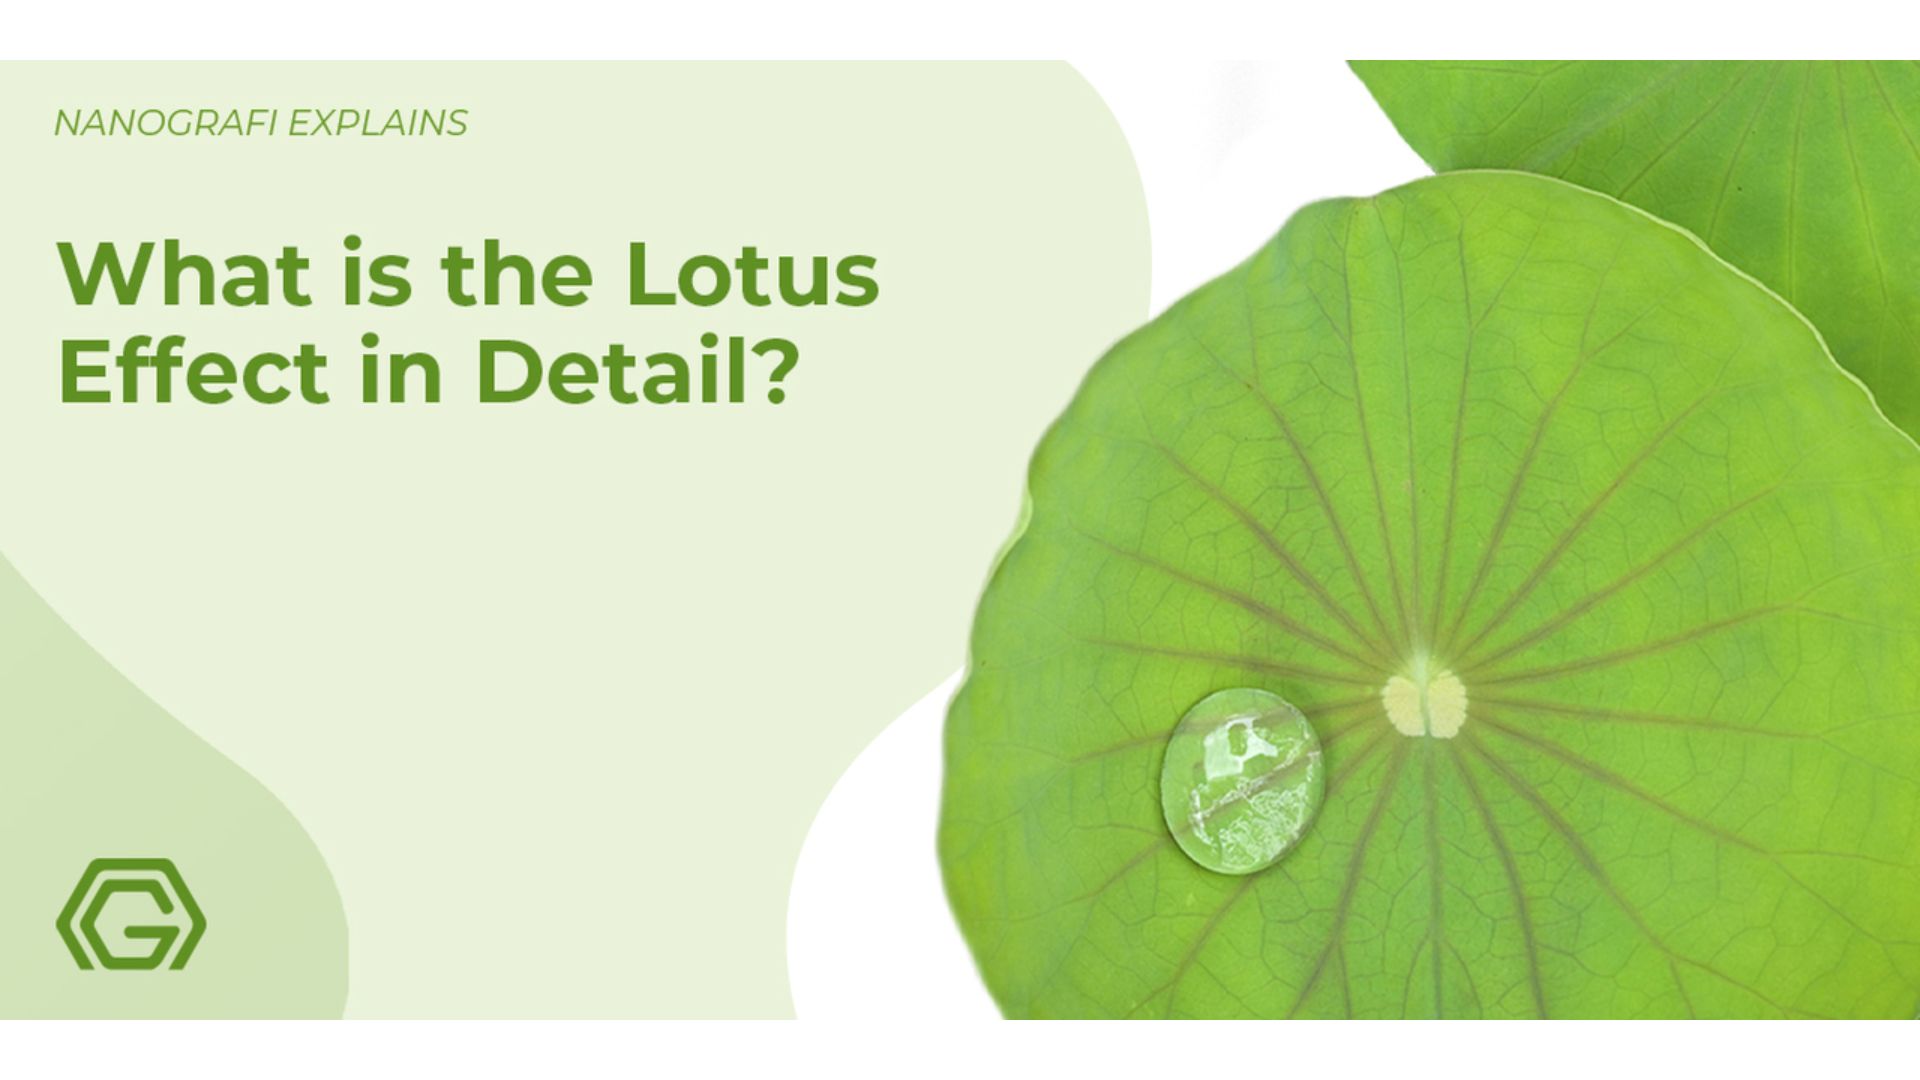 What is the lotus effect in detail?